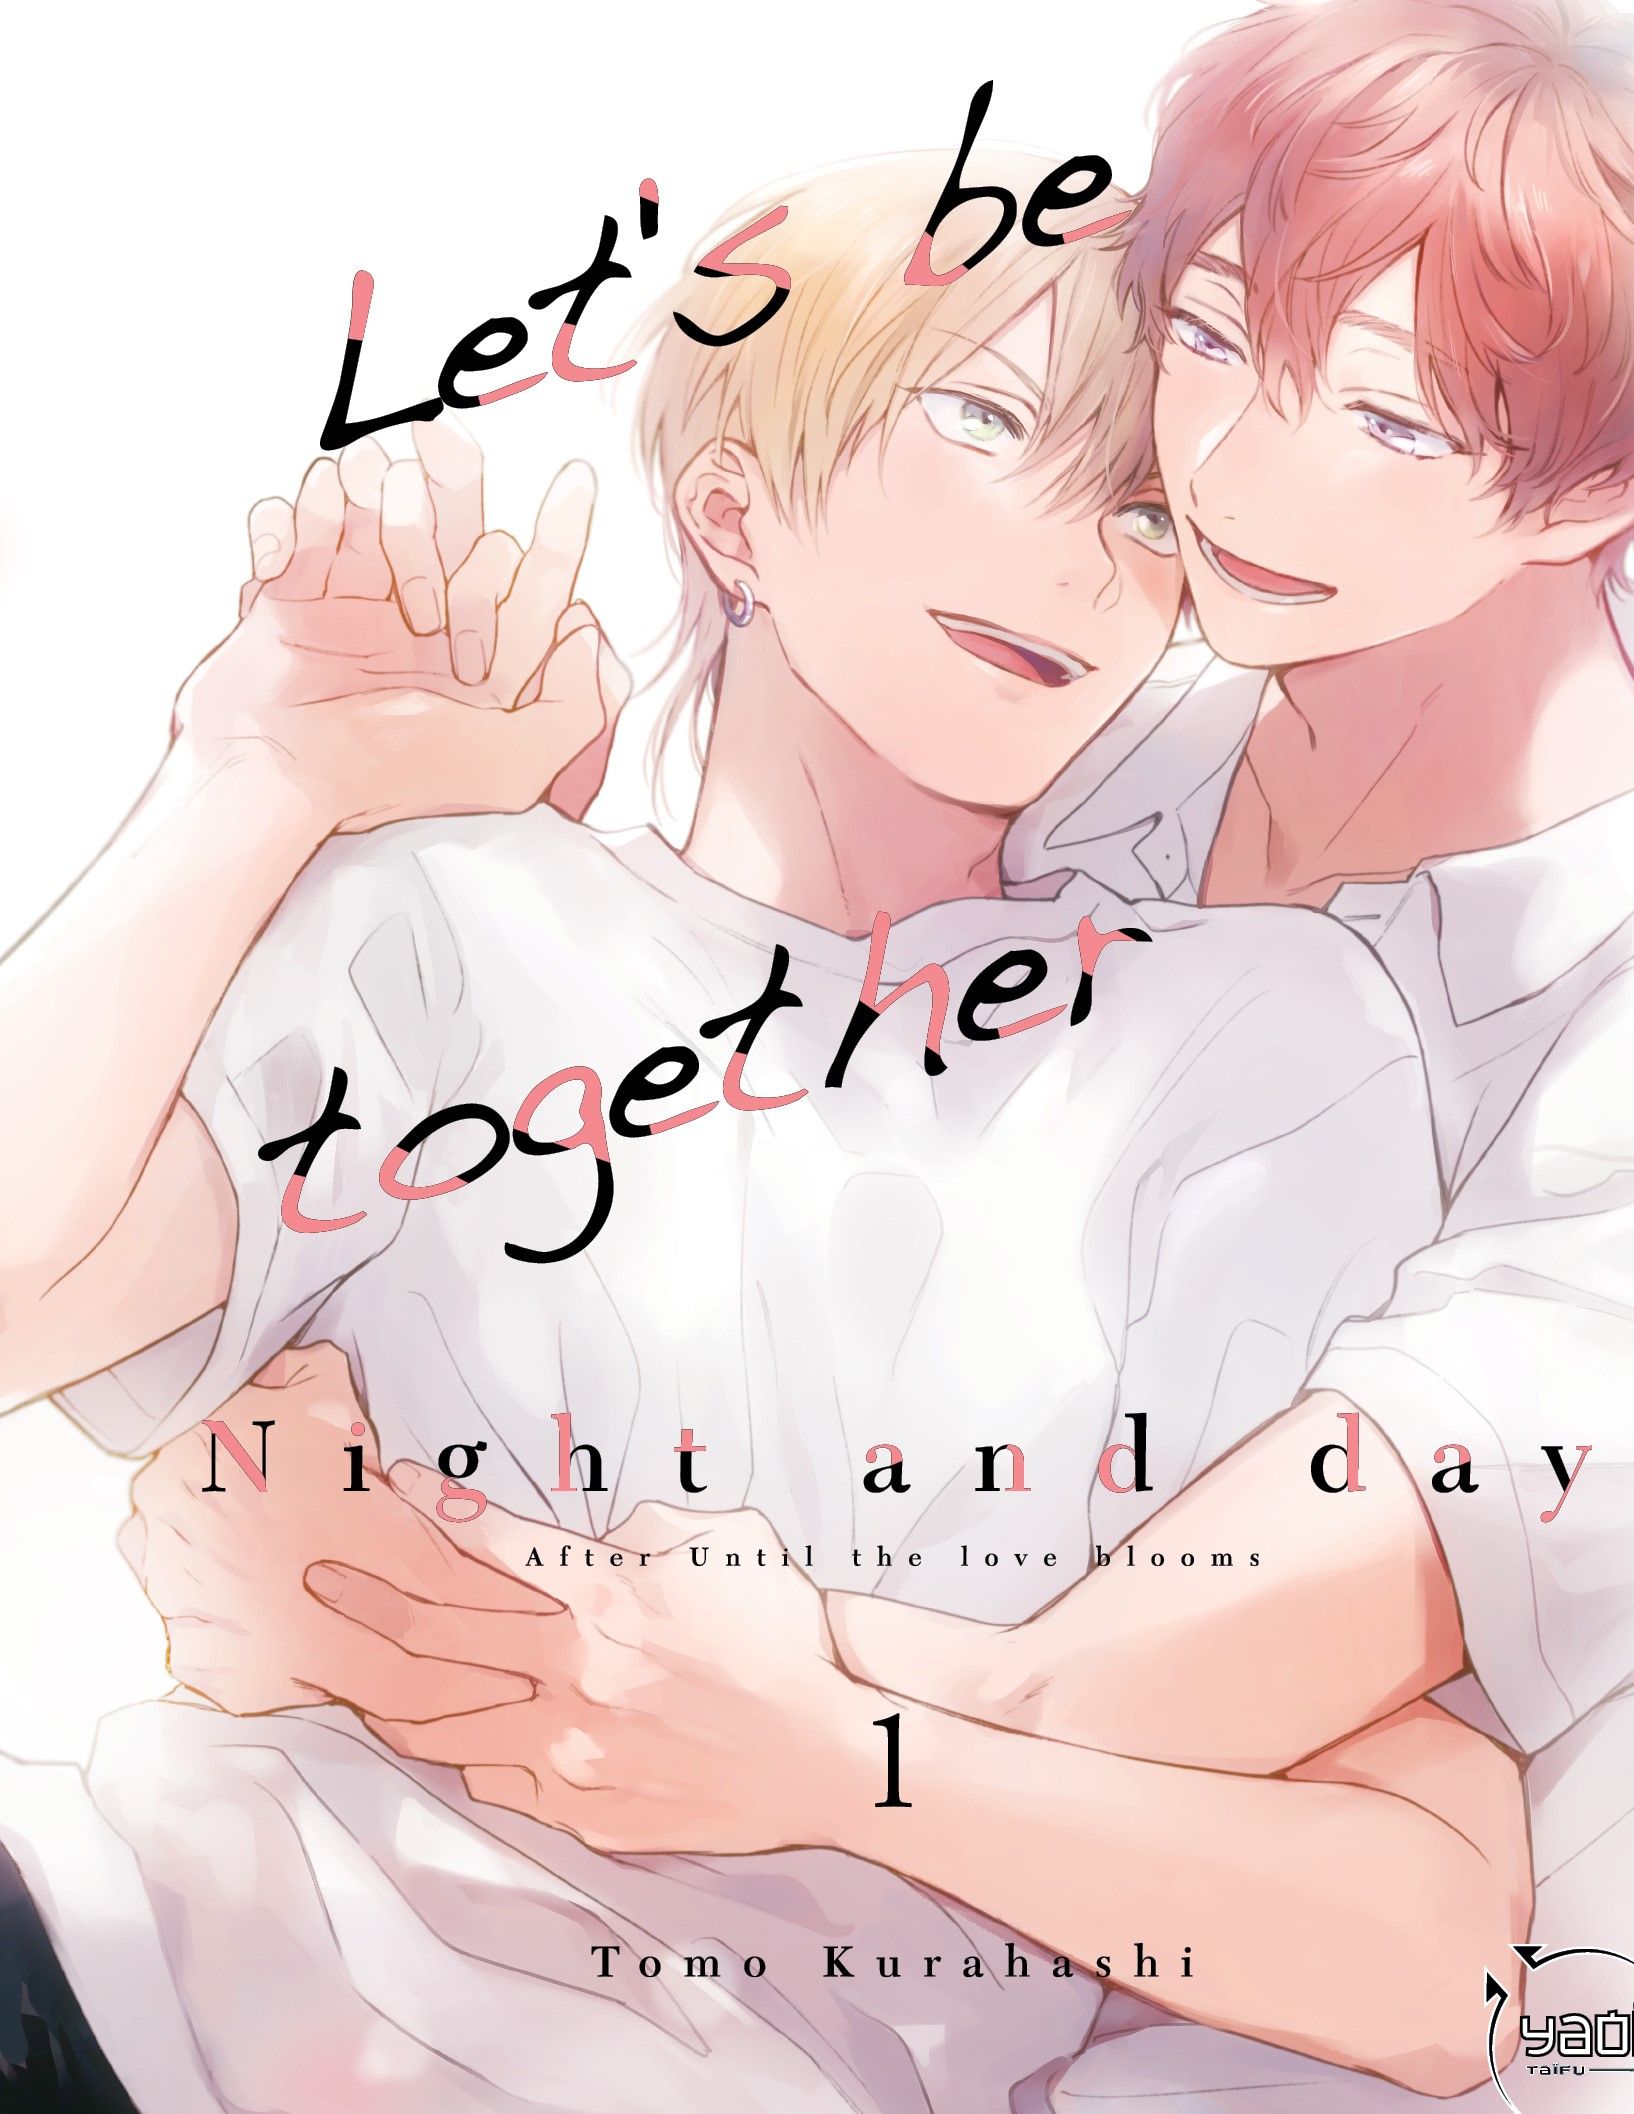 Let's be together - Night and Day